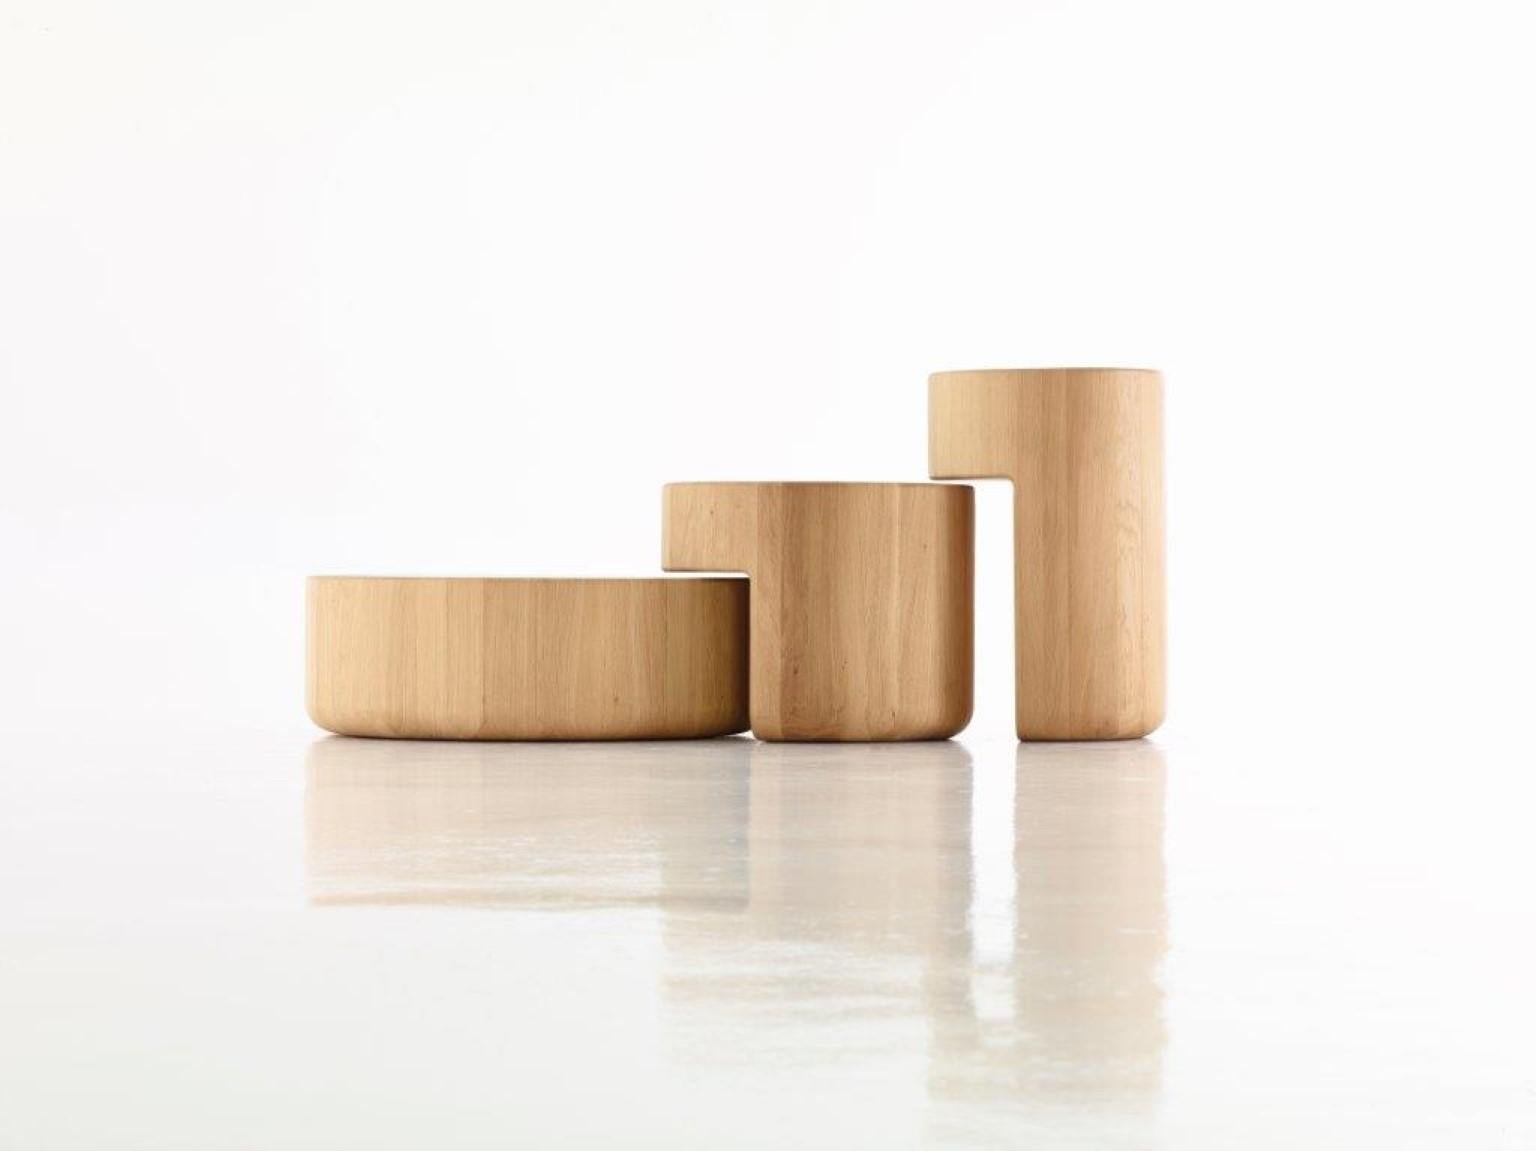 Contemporary Levels Low Table by Dan Yeffet & Lucie Koldova